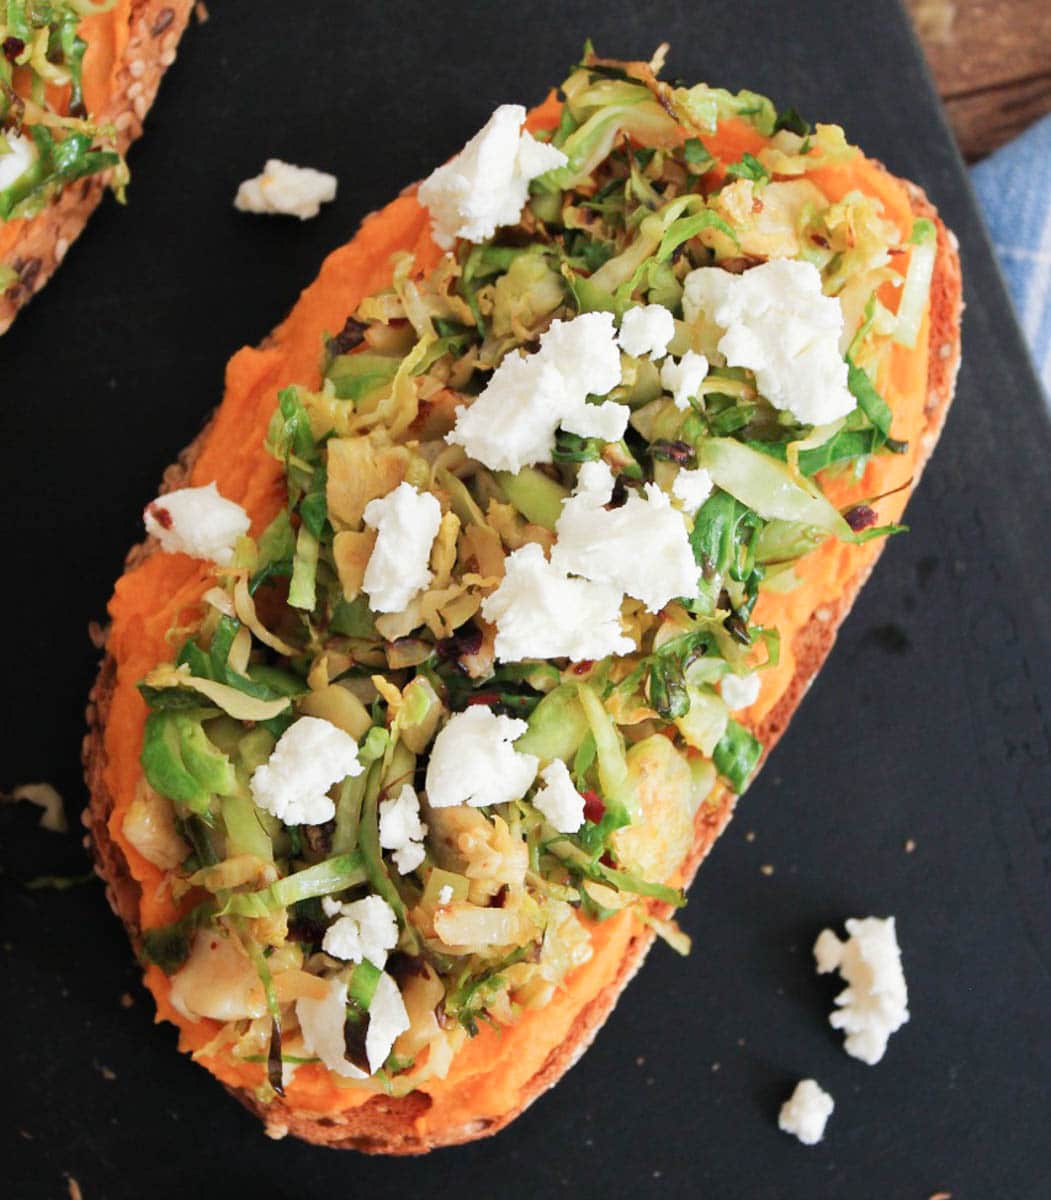 Sweet-Potato-Hummus-Tartine-with-Toasted-Brussels-Sprouts-and-Goat-Cheese-4